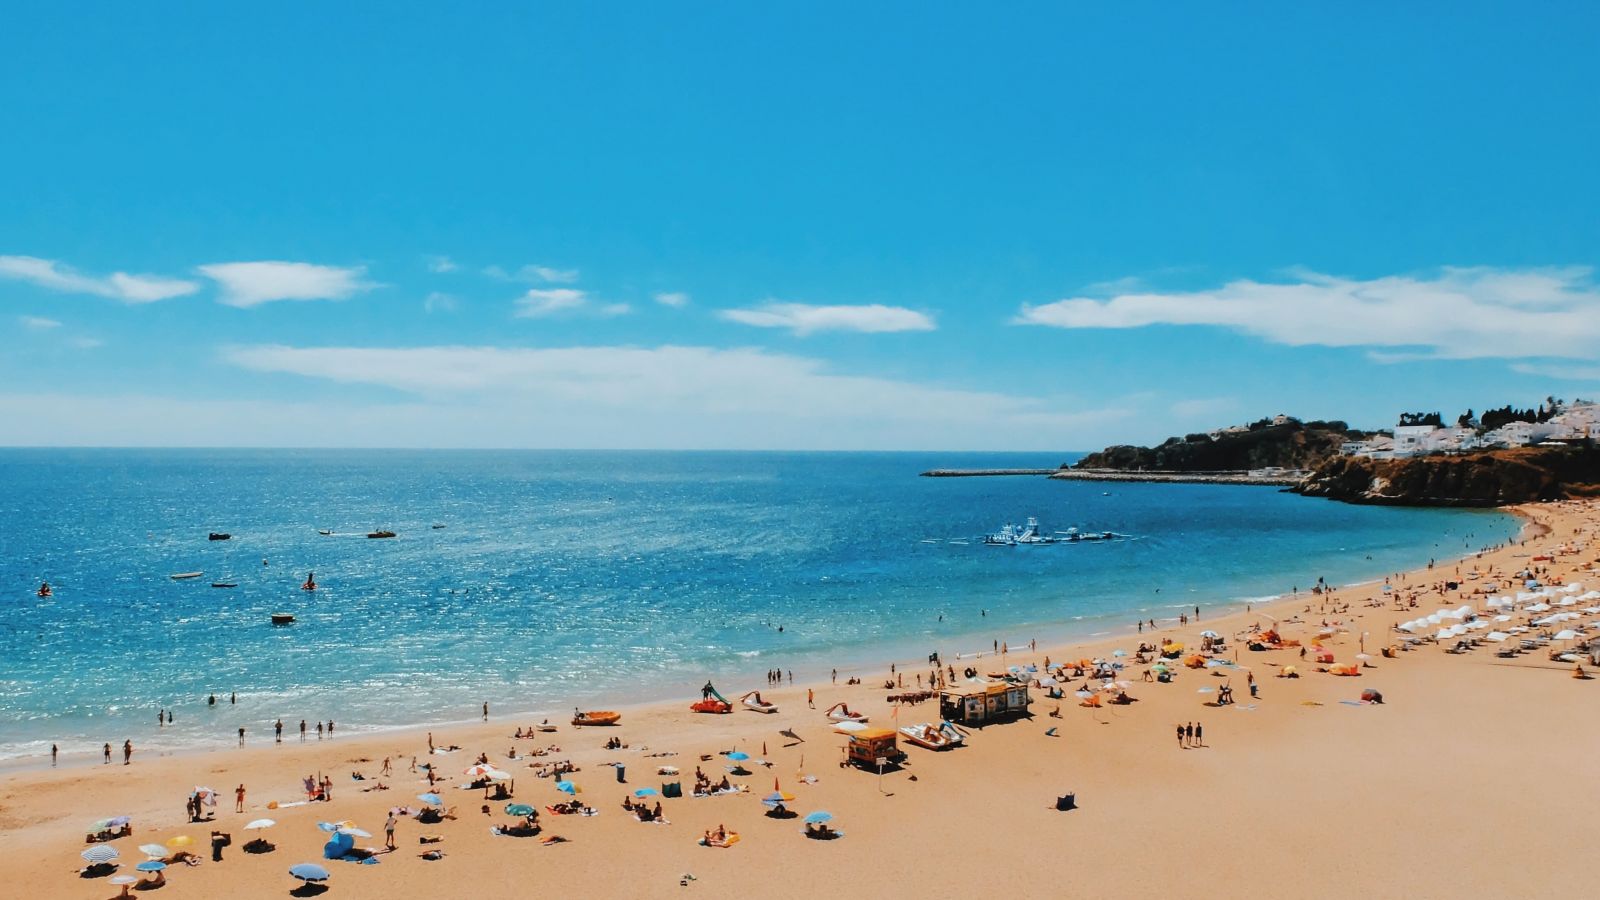 View on a beach in Albufeira, Portugal.